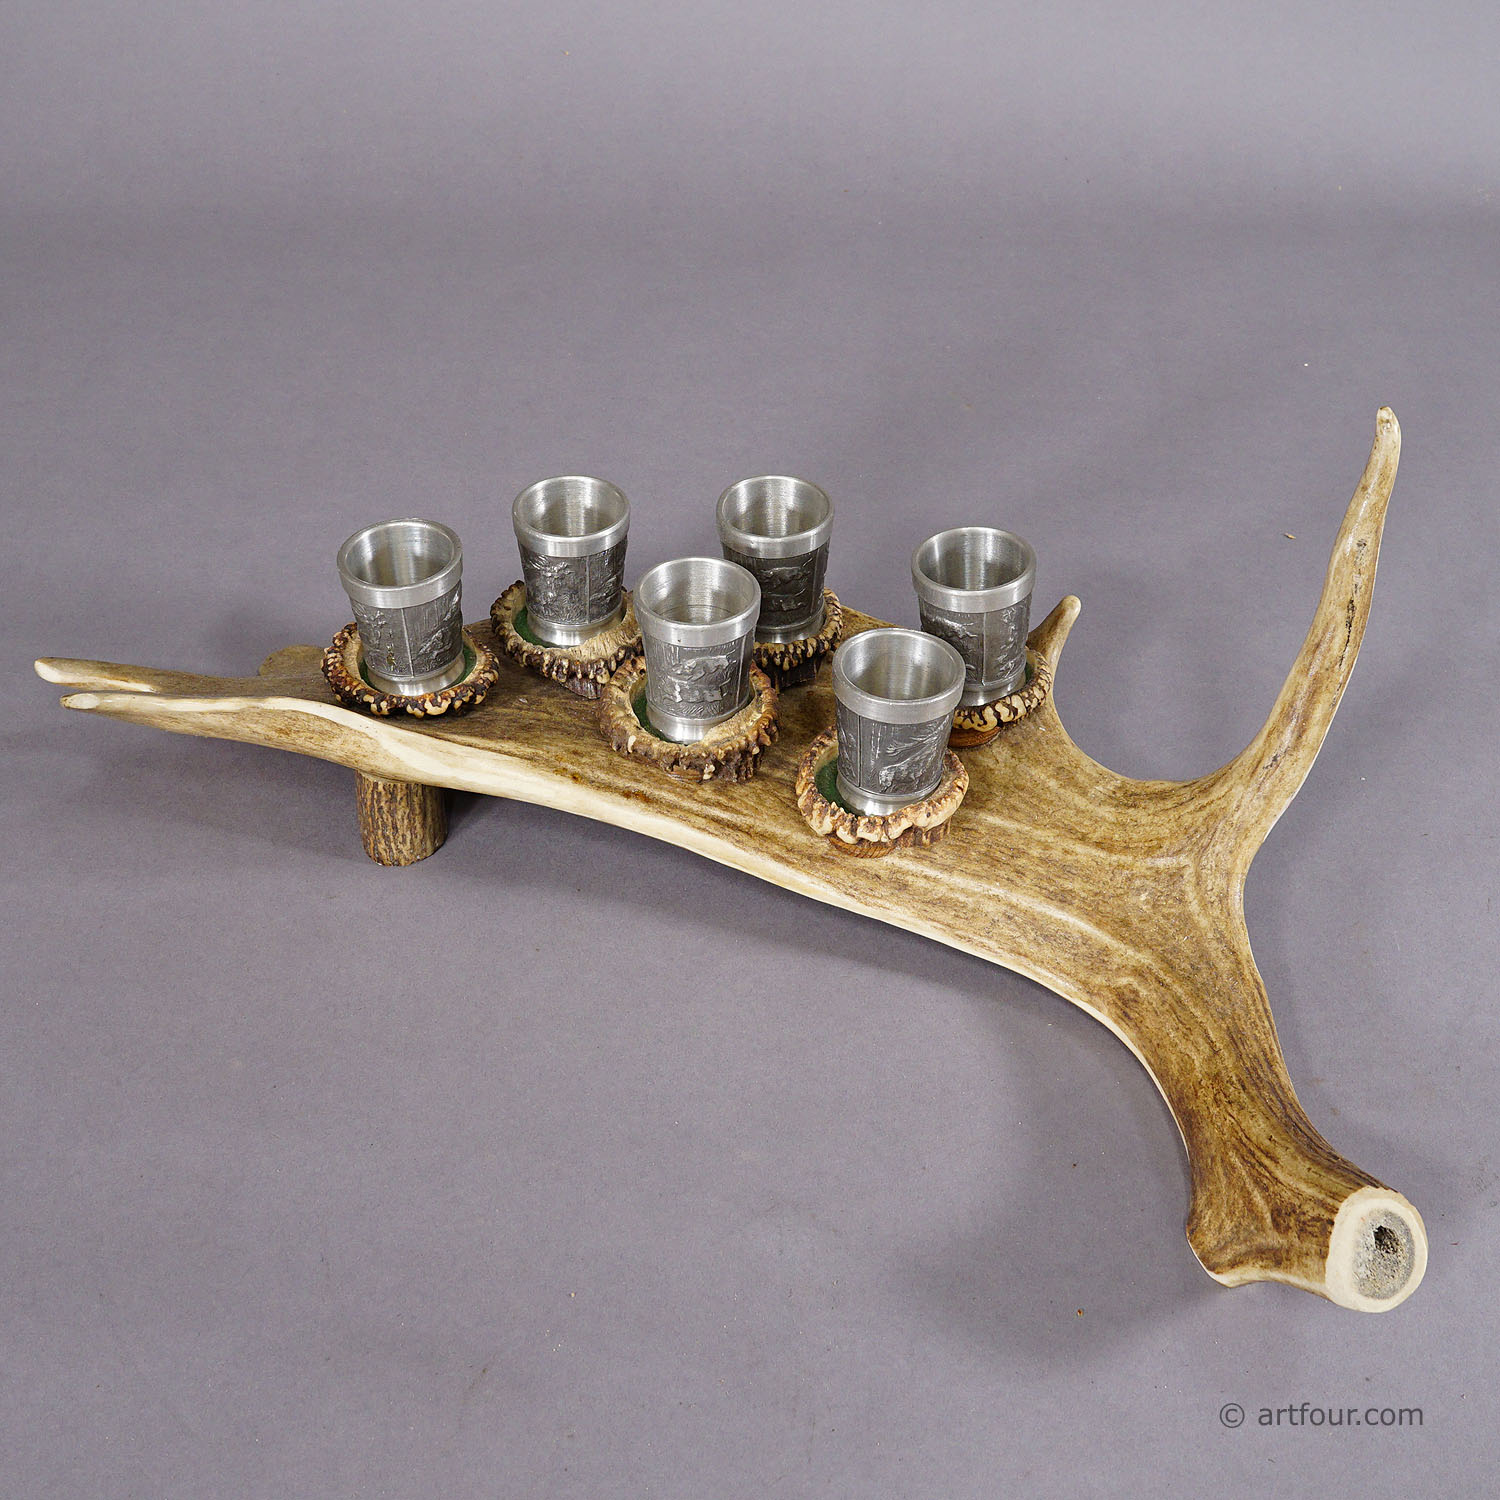 A Black Forest Rustic Drinking Set with Six Pewter Shot Glasses